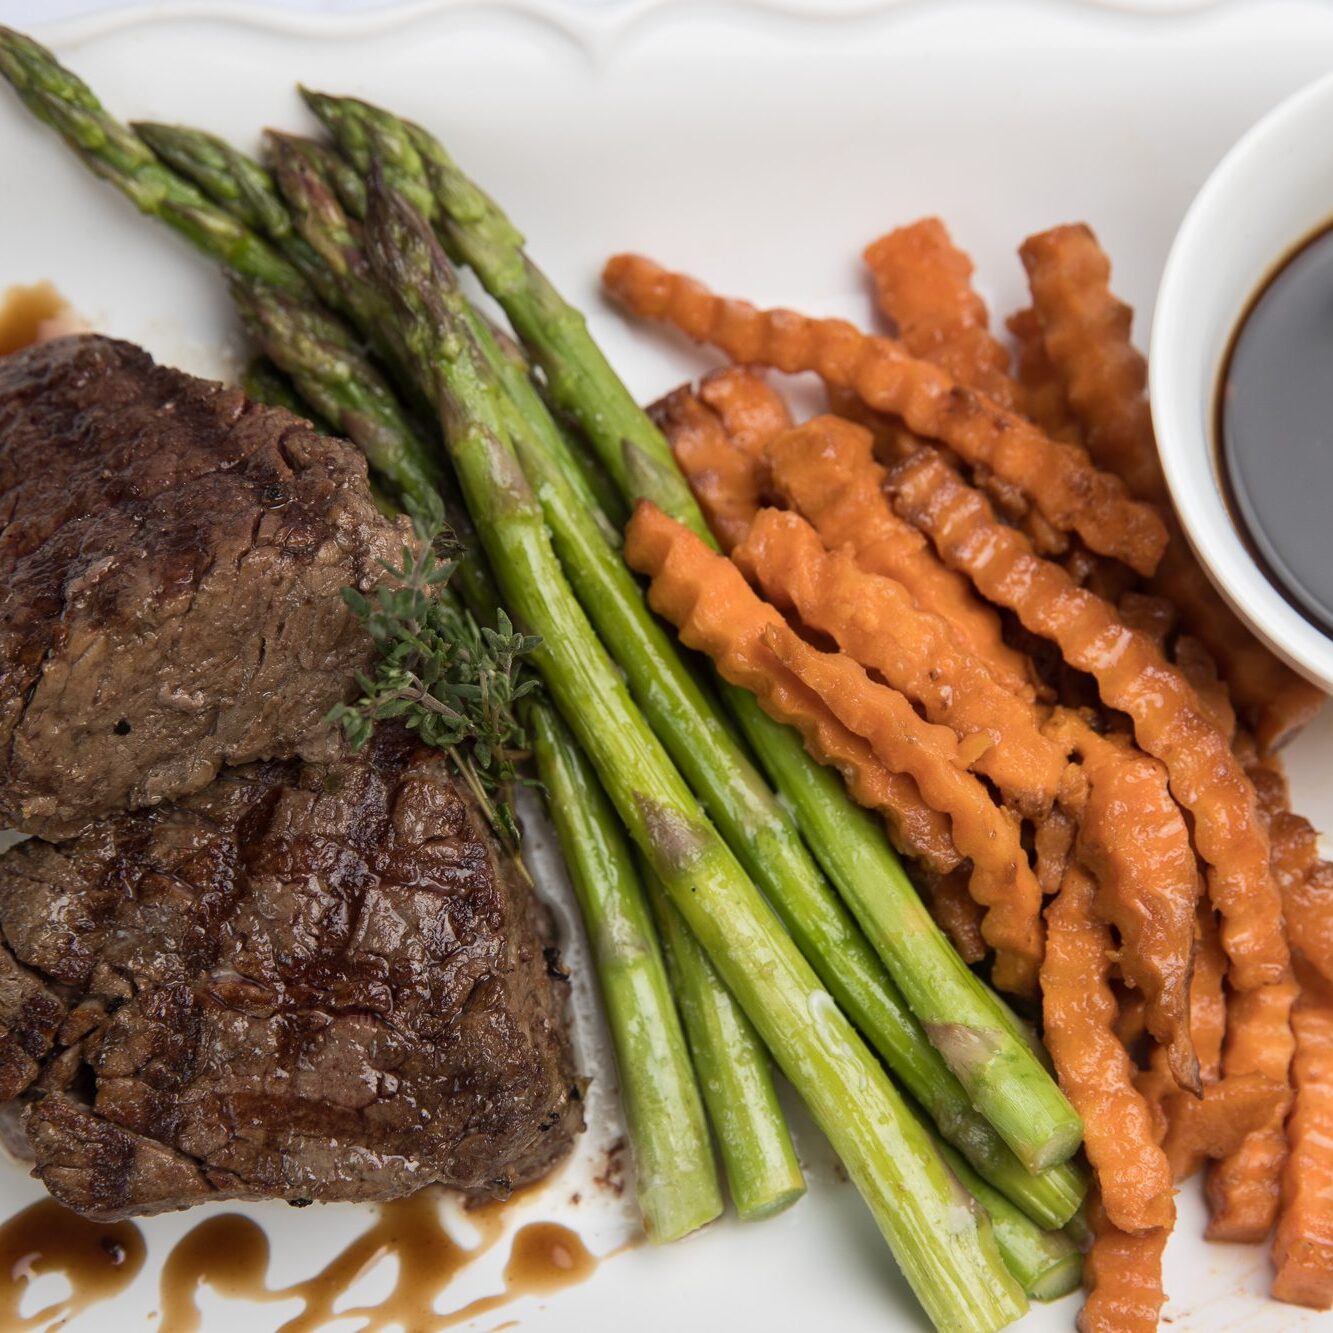 Delicious steak, asparagus, and sweet potato fries plated by Divine Taste of Heaven